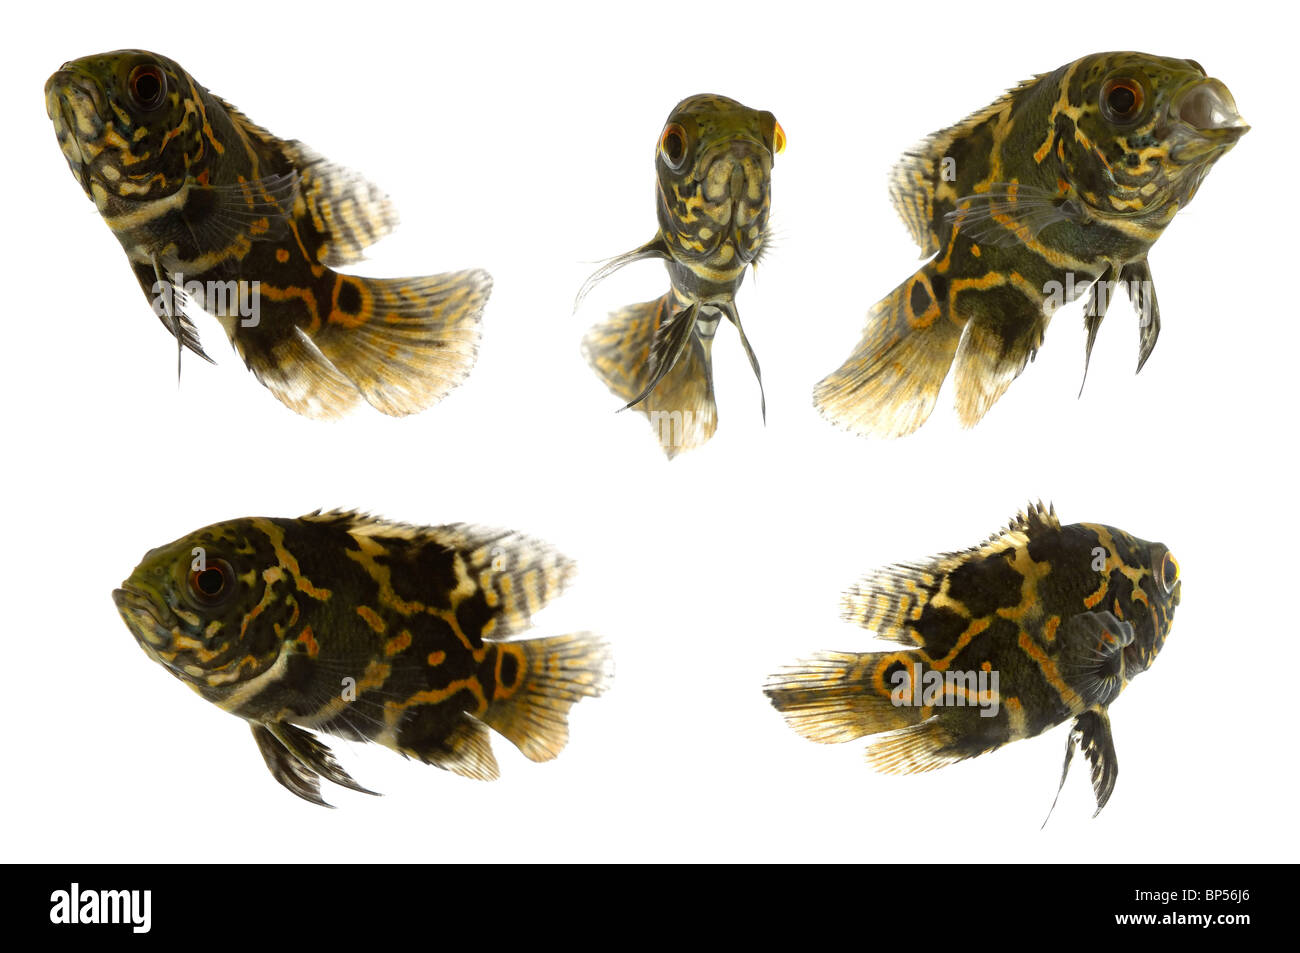 Five tiger oscar fish. Isolated on a clean white background. Stock Photo